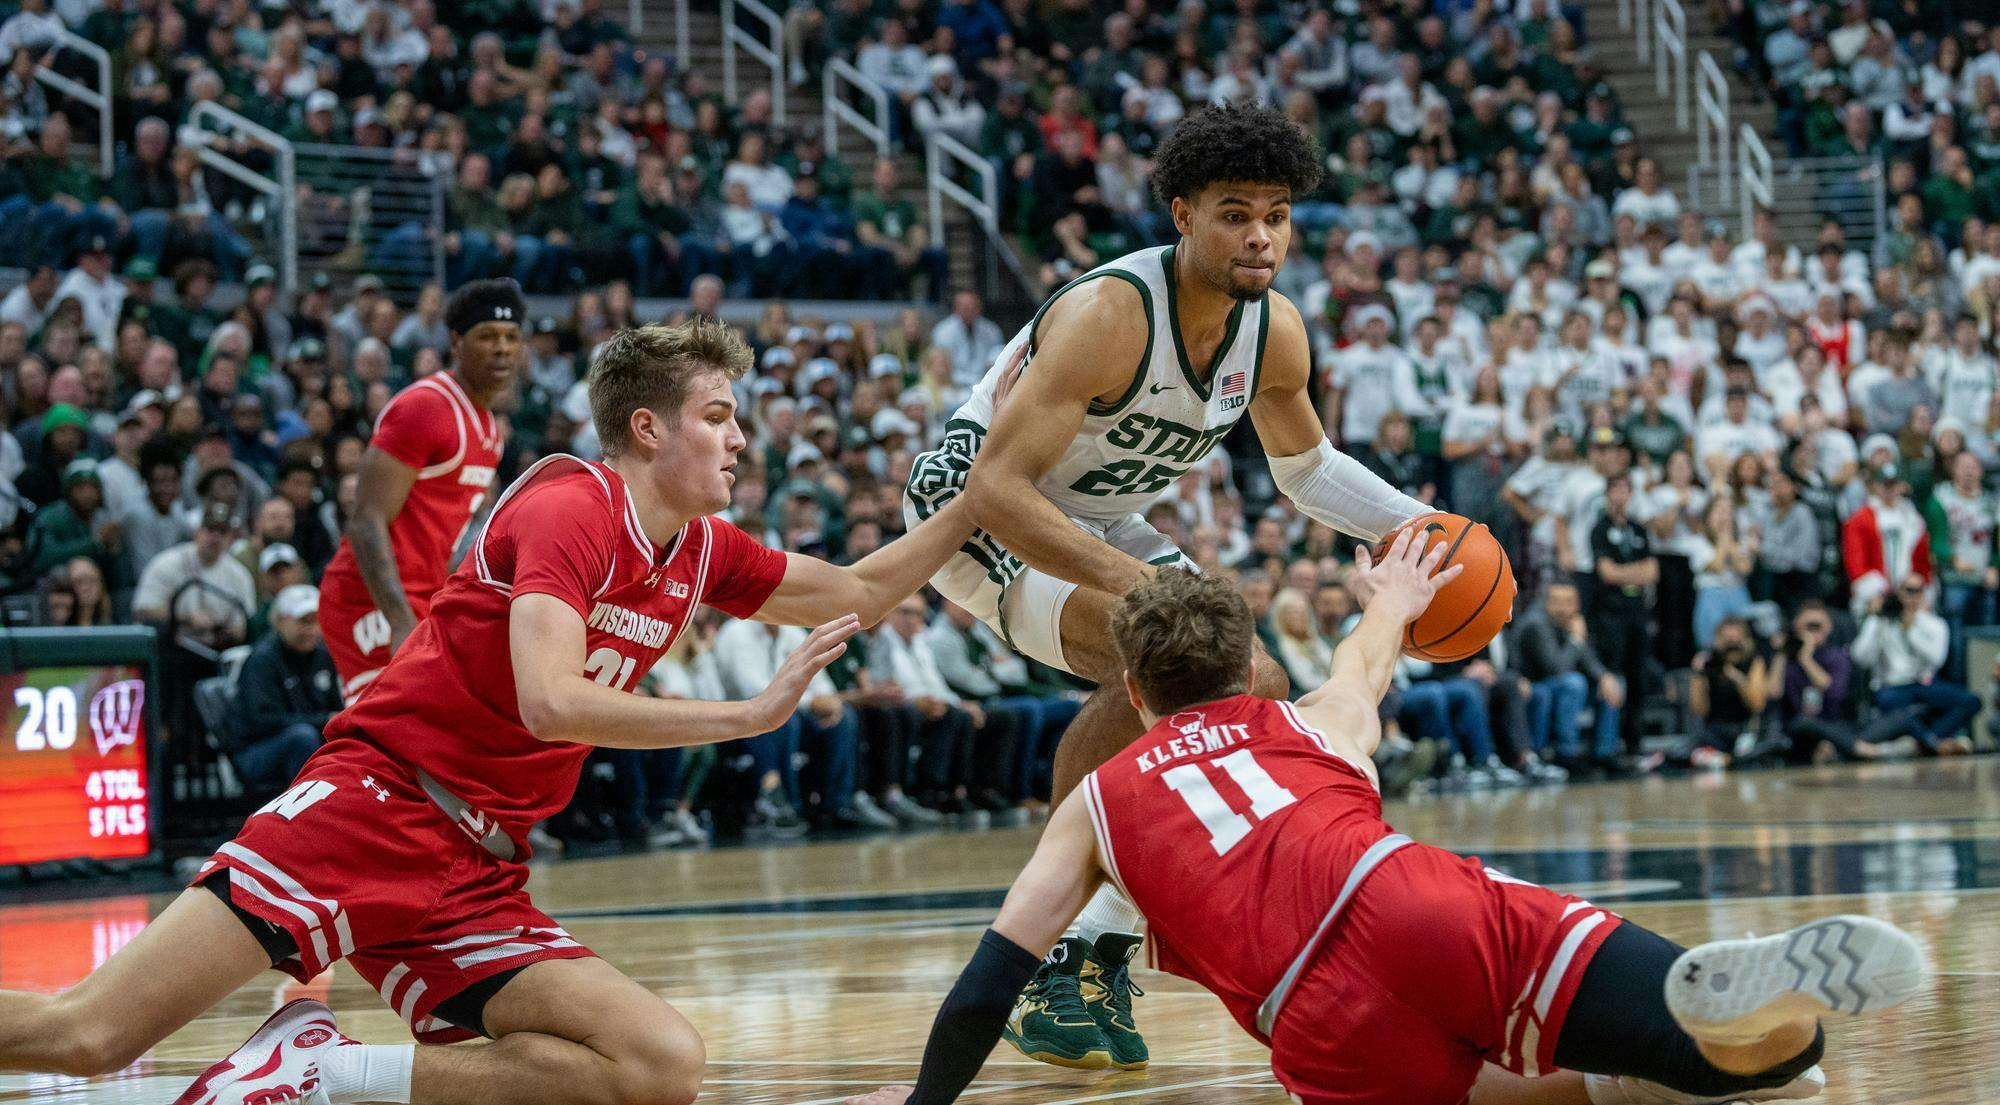 MSU Graduate Student Forward Malik Hall (25) protects the ball from Wisconsin players during the matchup at the Breslin Center on Dec. 5, 2023. MSU would go on to lose 57-70 against 23 Wisconsin.